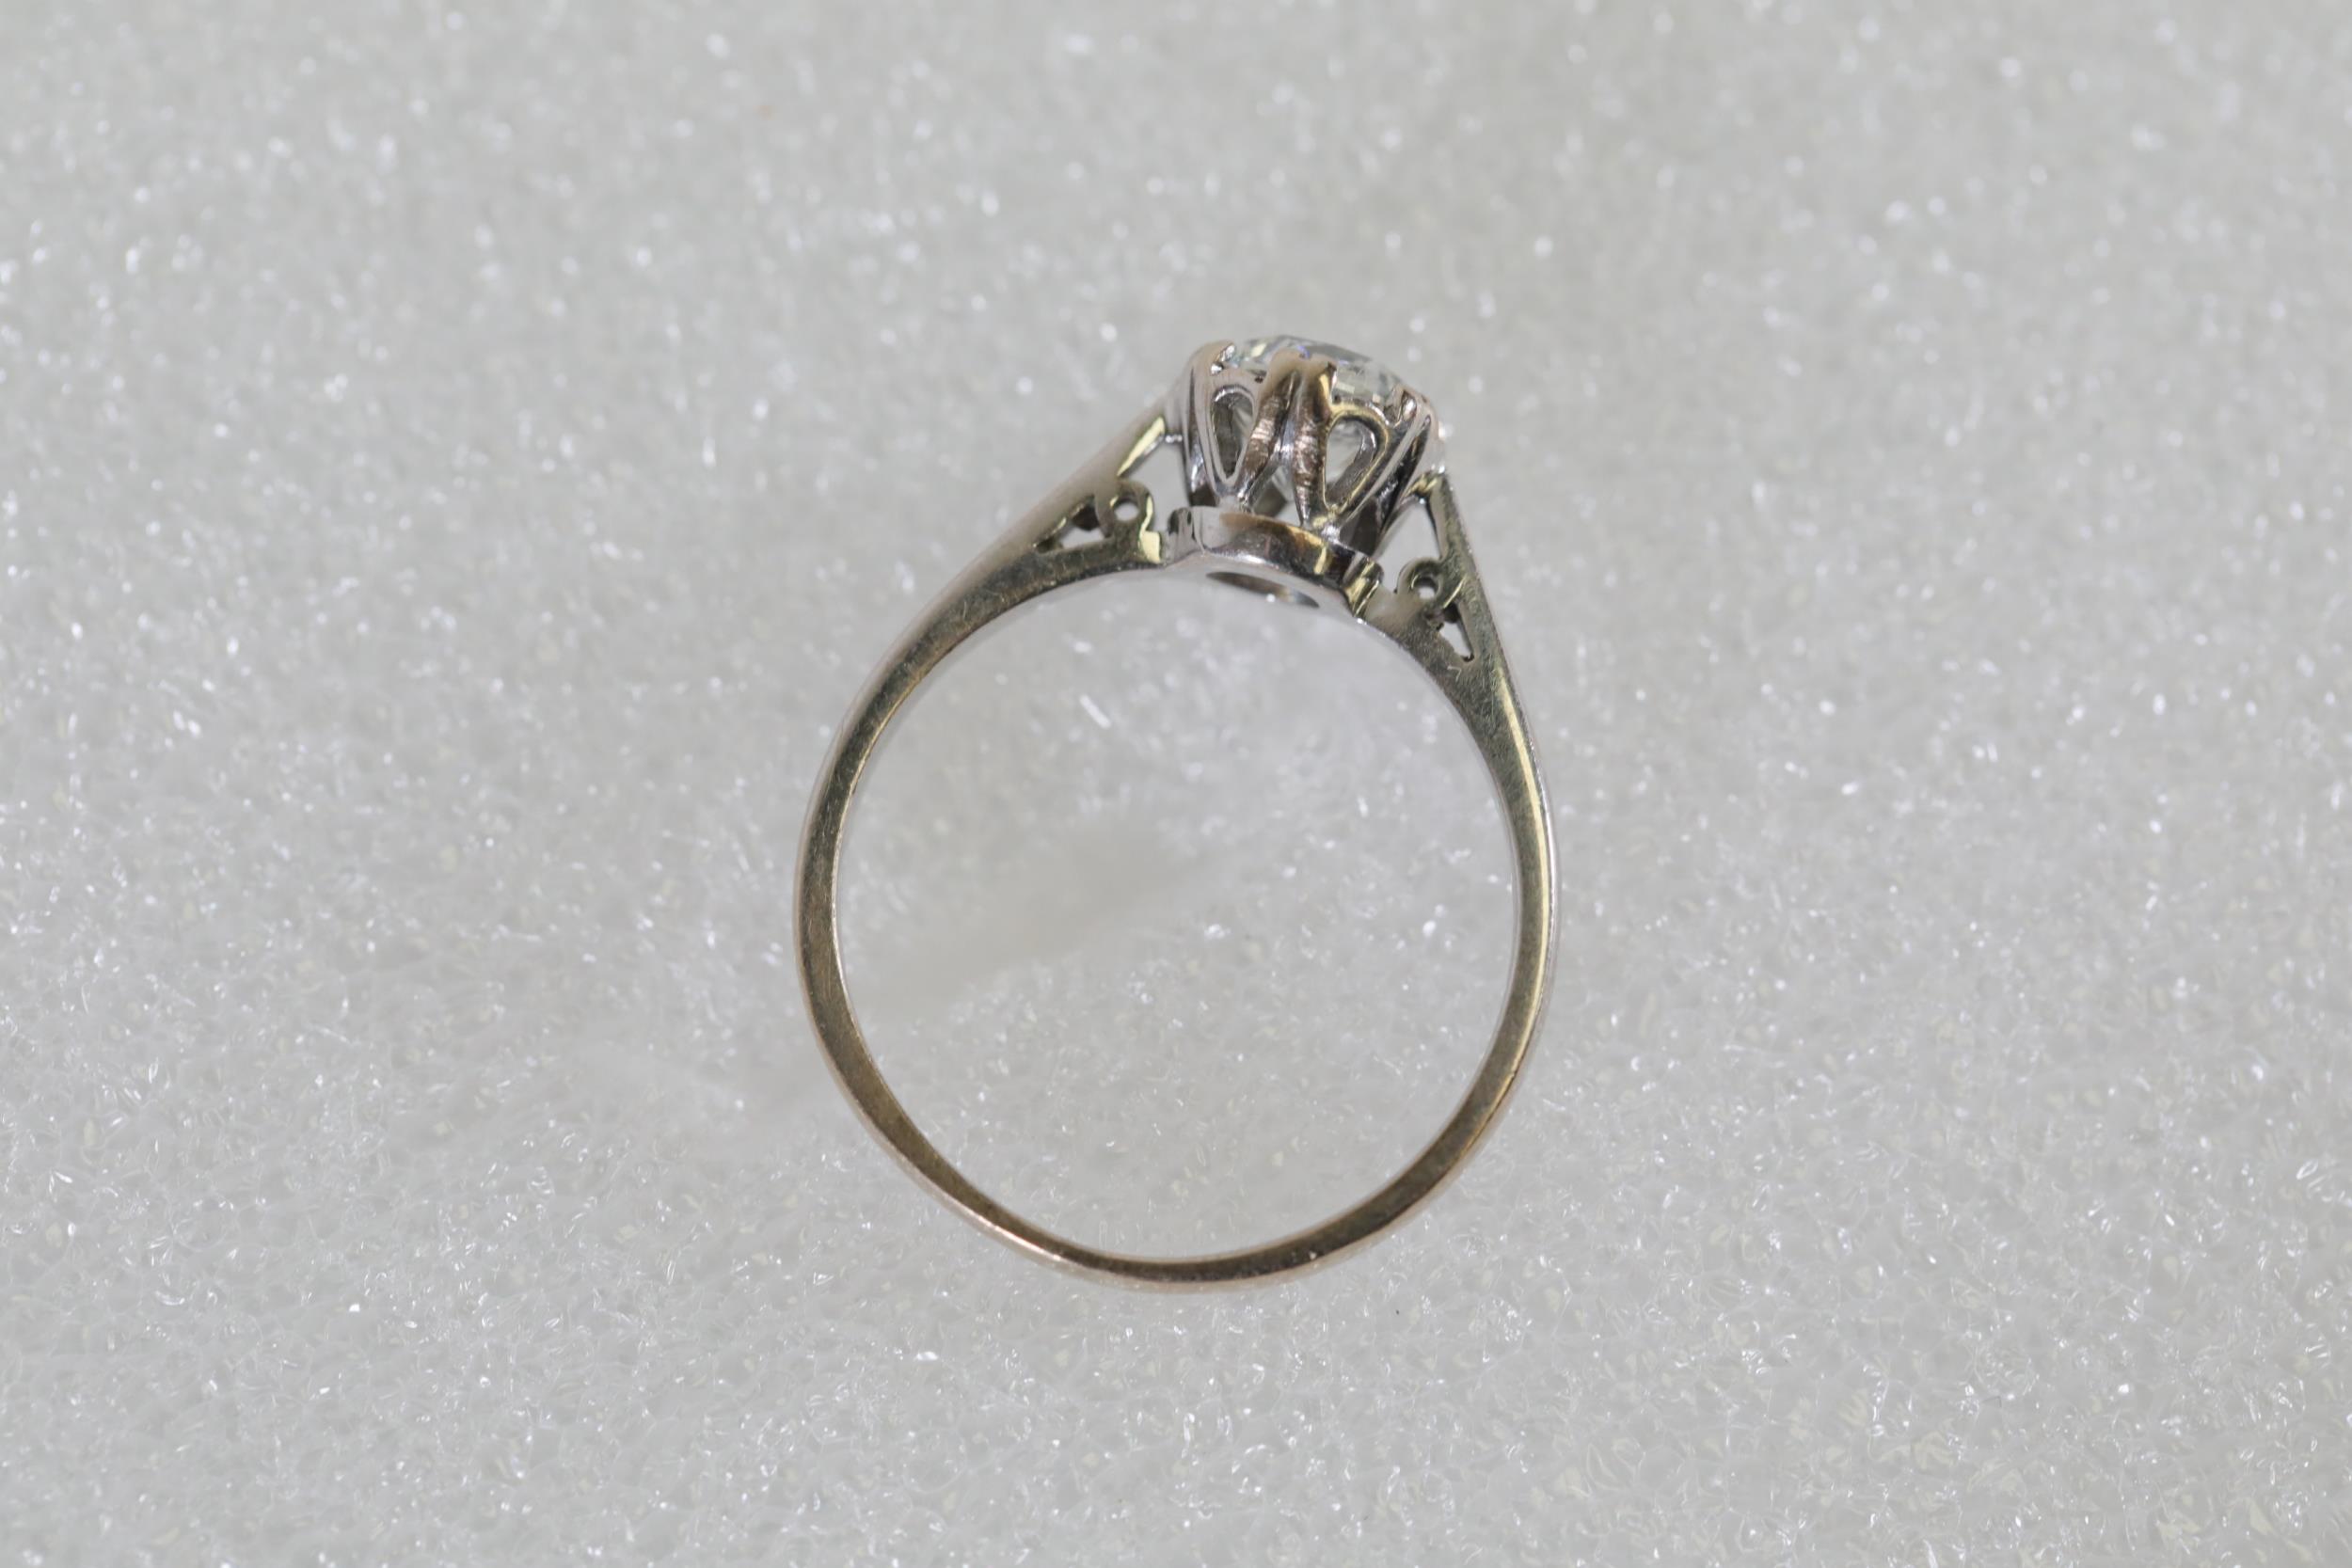 18CT White Gold and Diamond Ring - Image 4 of 8